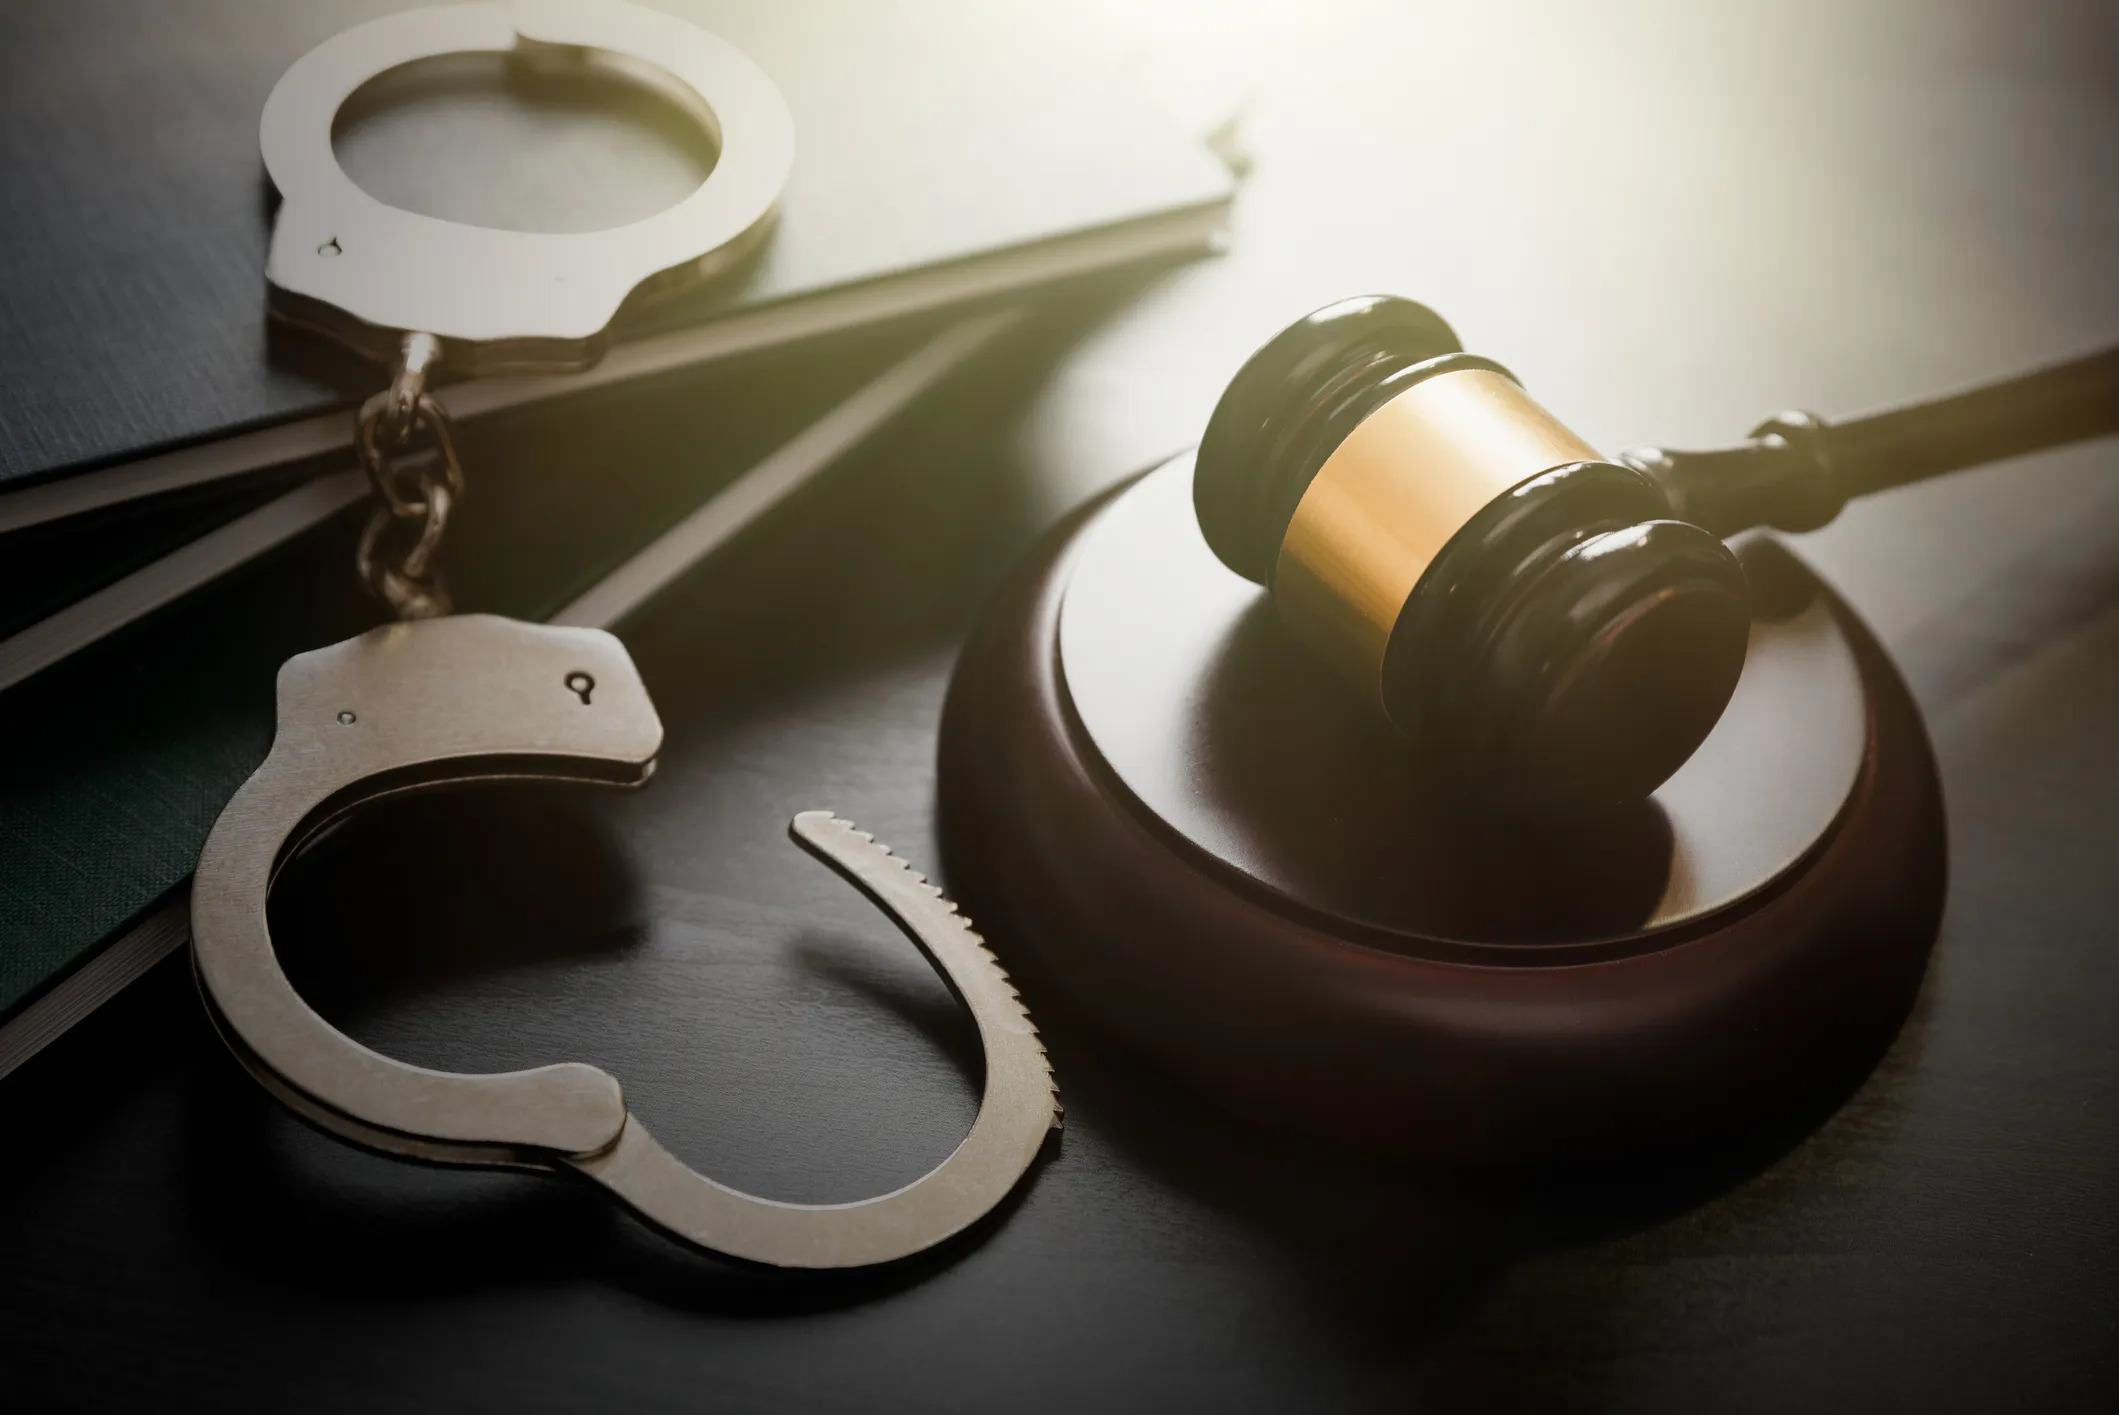 If you're facing a sexual offense charge, you need an experienced criminal defense attorney in York, PA.